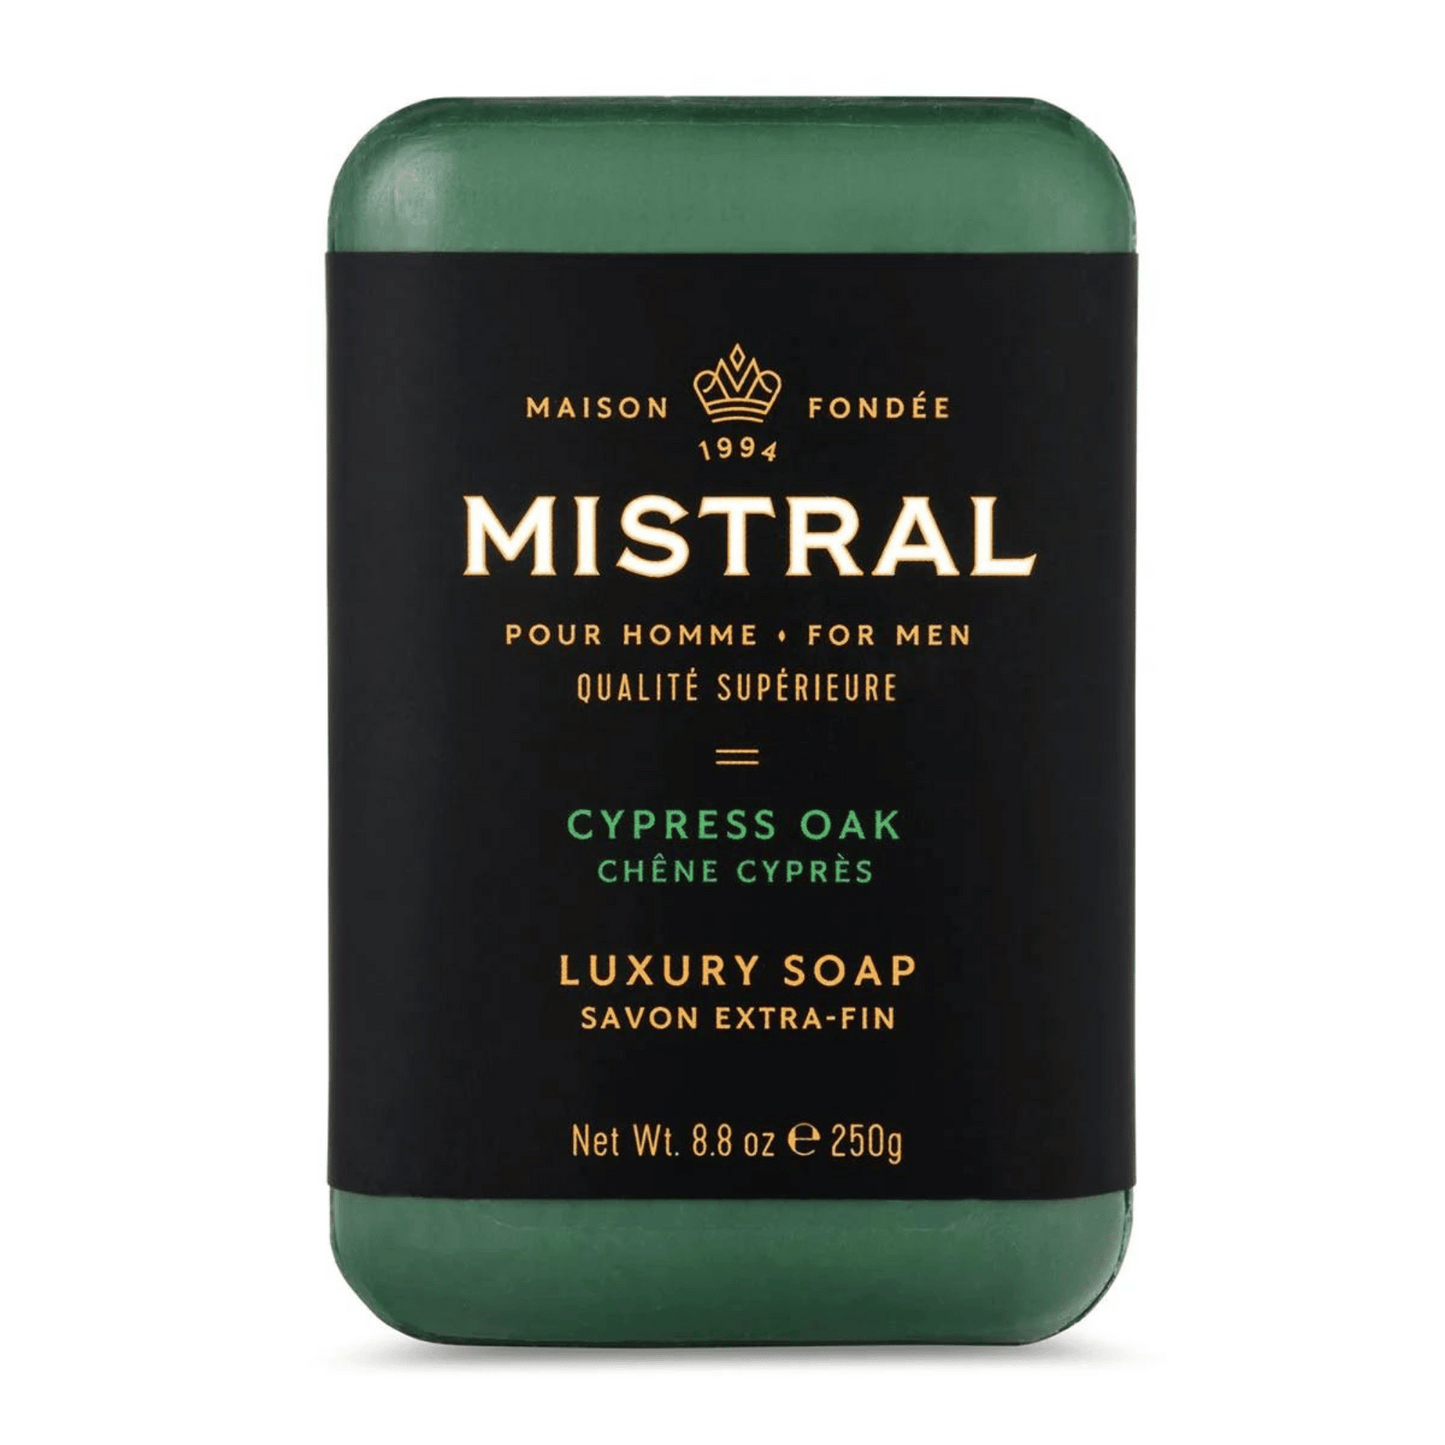 Primary Image of Cypress Oak Bar Soap